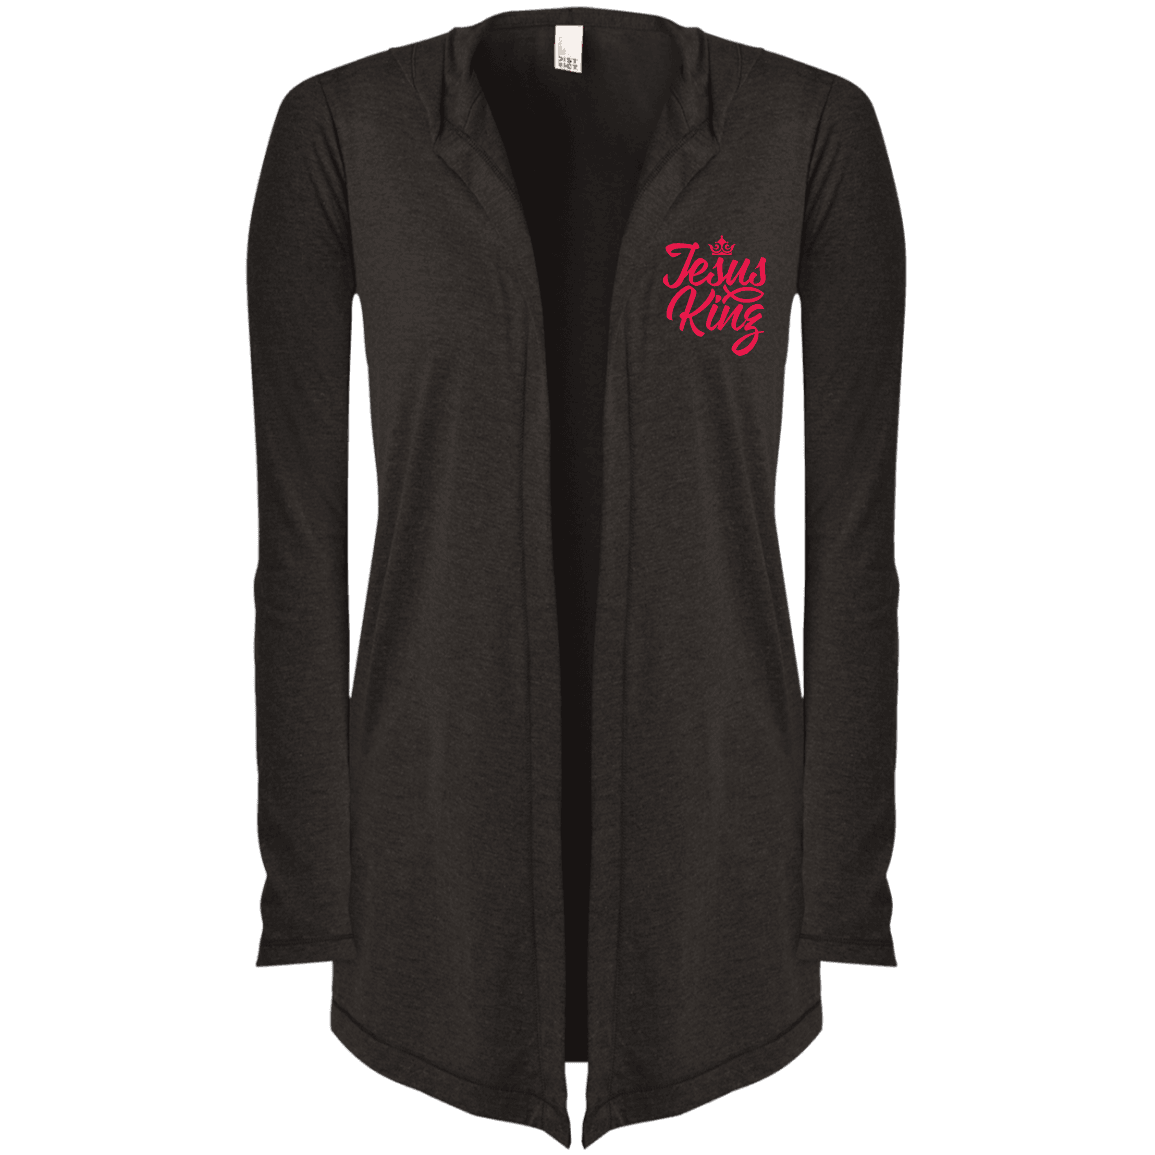 Designs by MyUtopia Shout Out:Jesus King Embroidered Women's Hooded Cardigan,Black Frost / X-Small,Sweatshirts